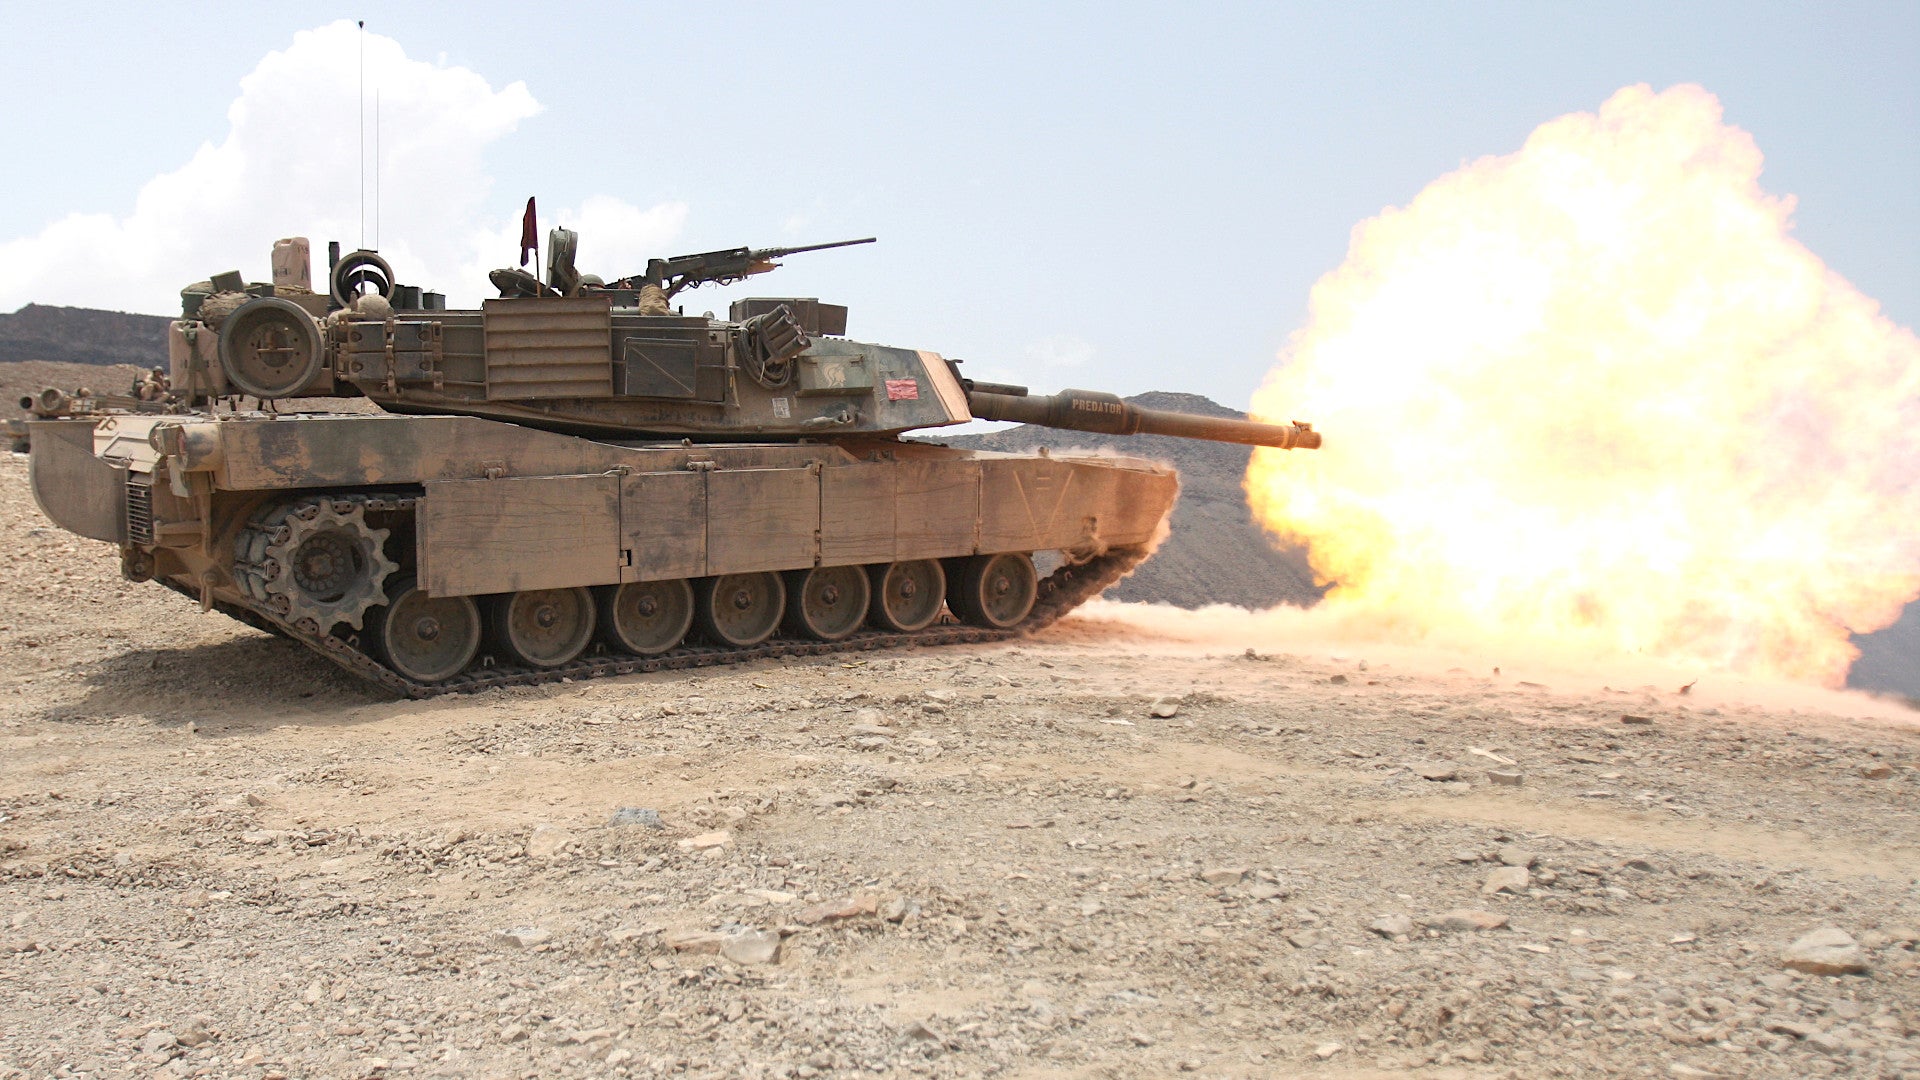 M1A1 Abrams Variant Will Be Given To Ukraine To Expedite Tank Deliveries